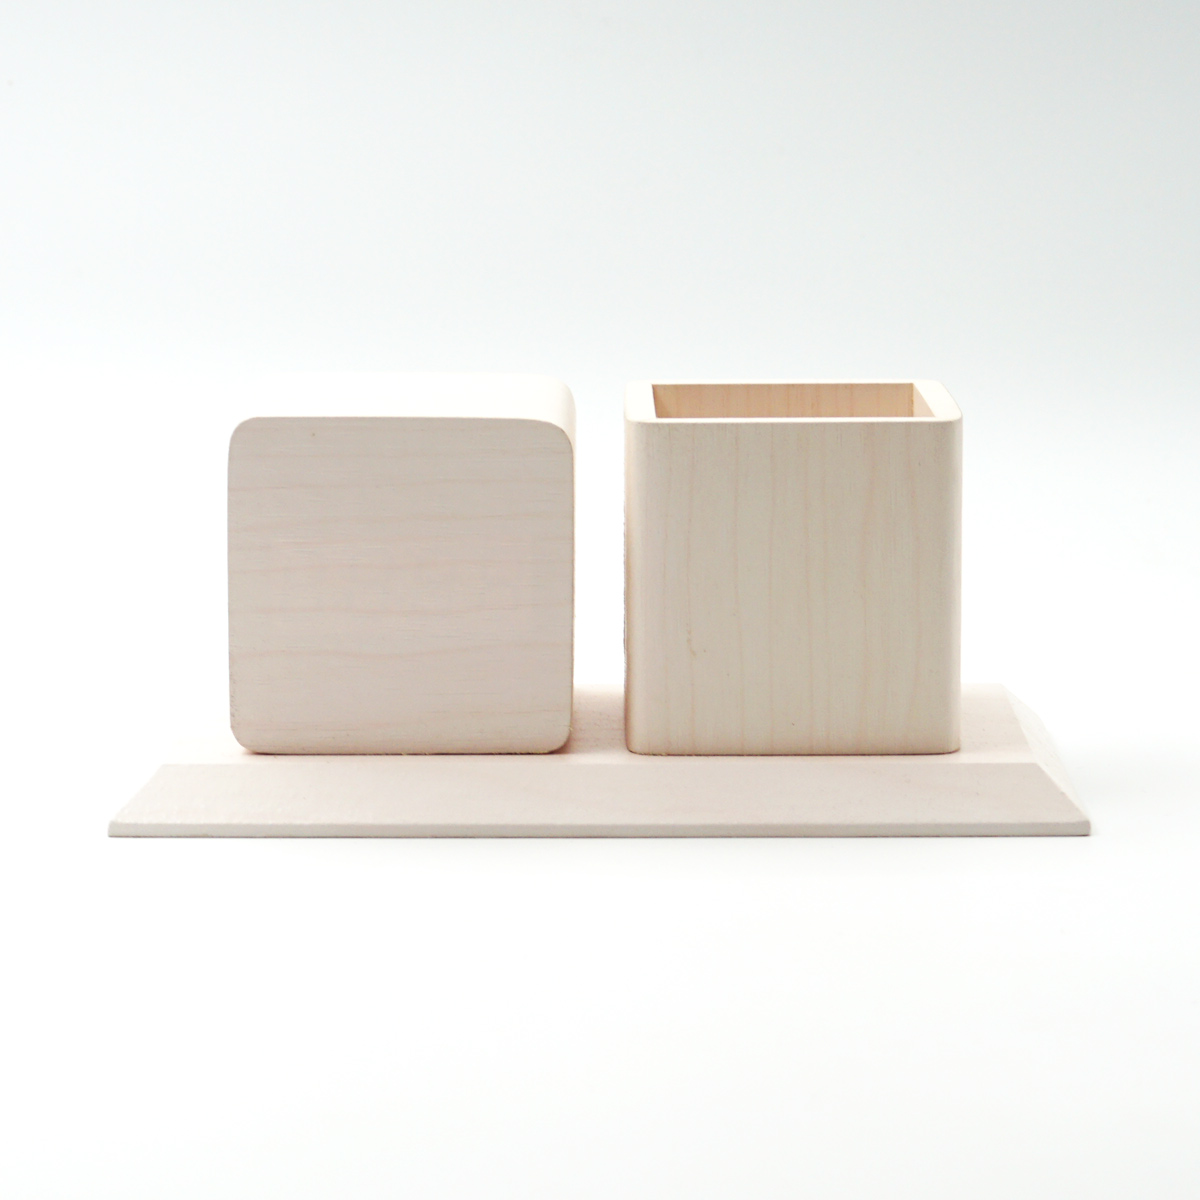 Penhouse.in White Color Plastic Pen Stand Wooden Finish With USB cable and Battery Connecting display Shown Time SKU96649